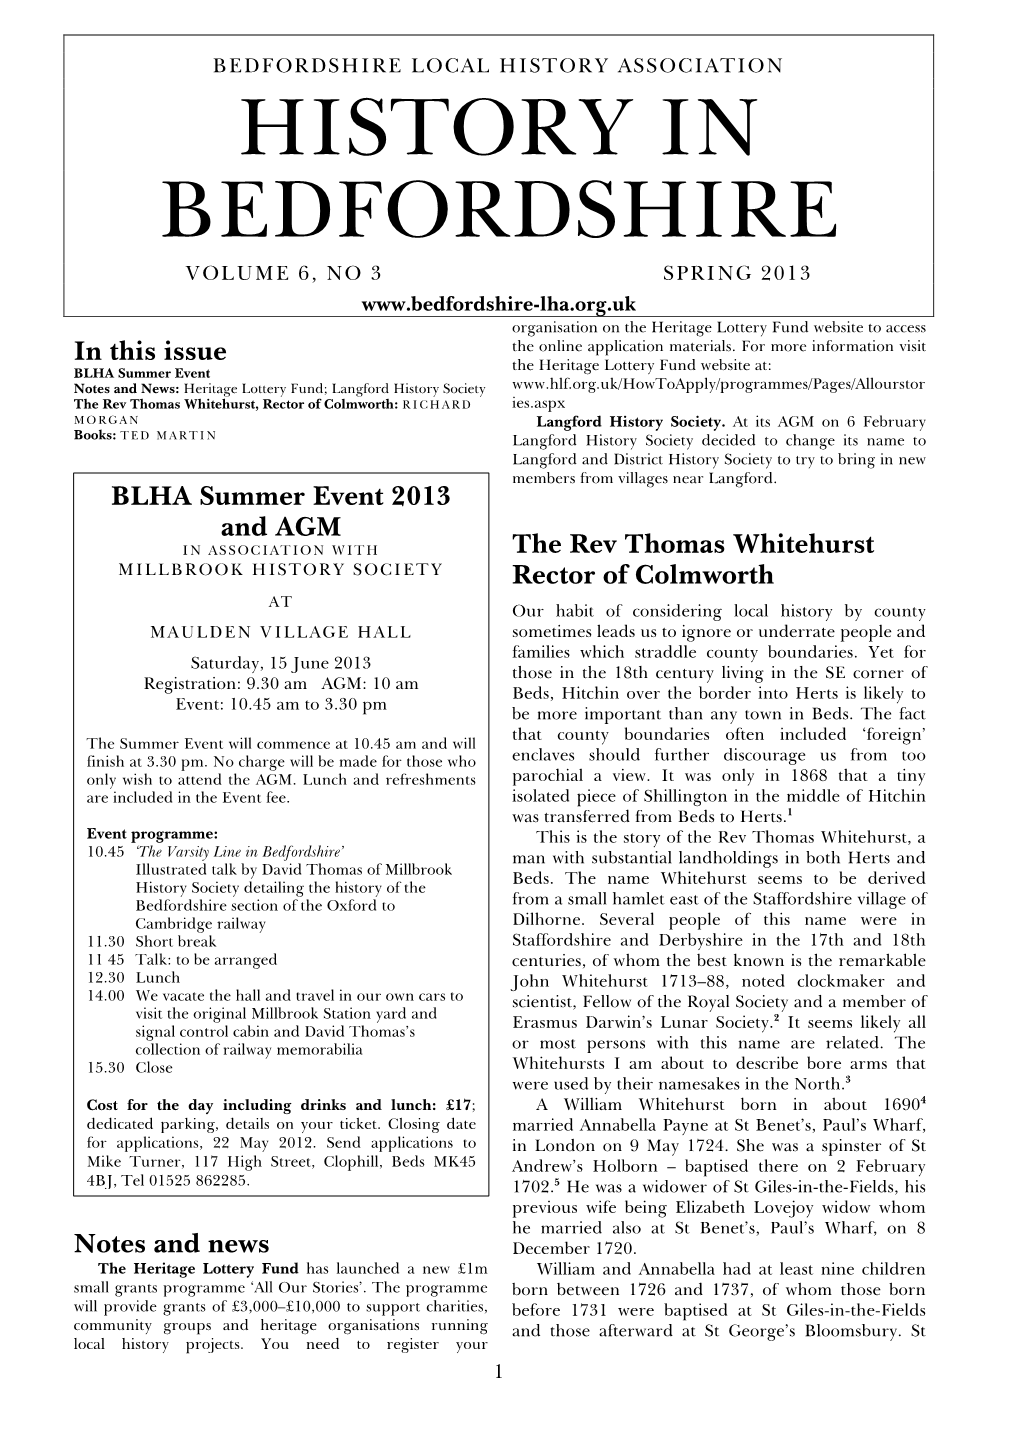 History in Bedfordshire Volume 6, No 3 Spring 2013